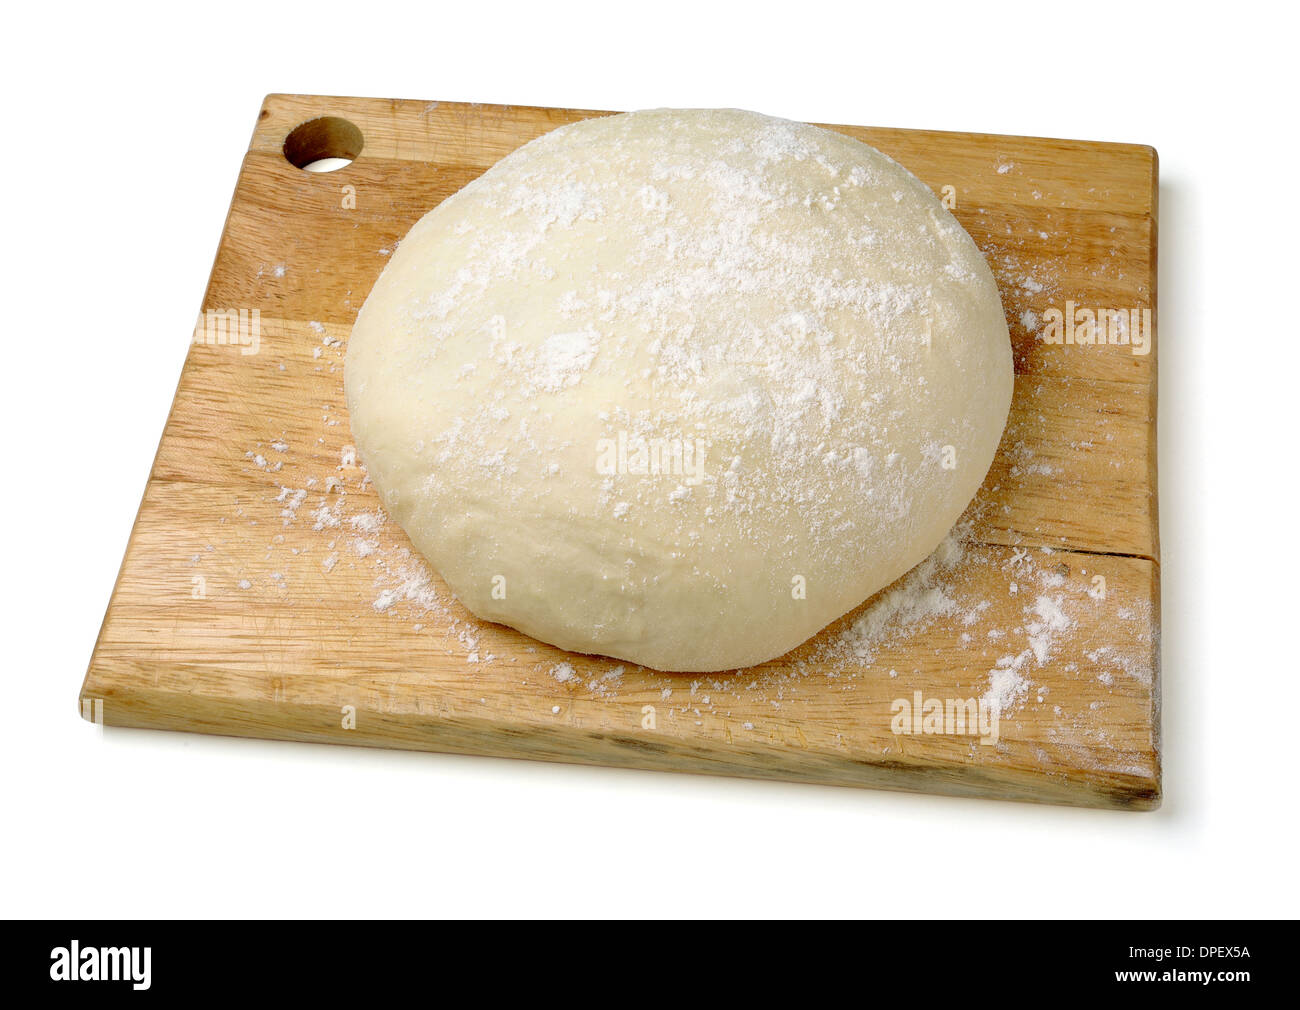 Raw wheat dough on cutting board on a white background Stock Photo